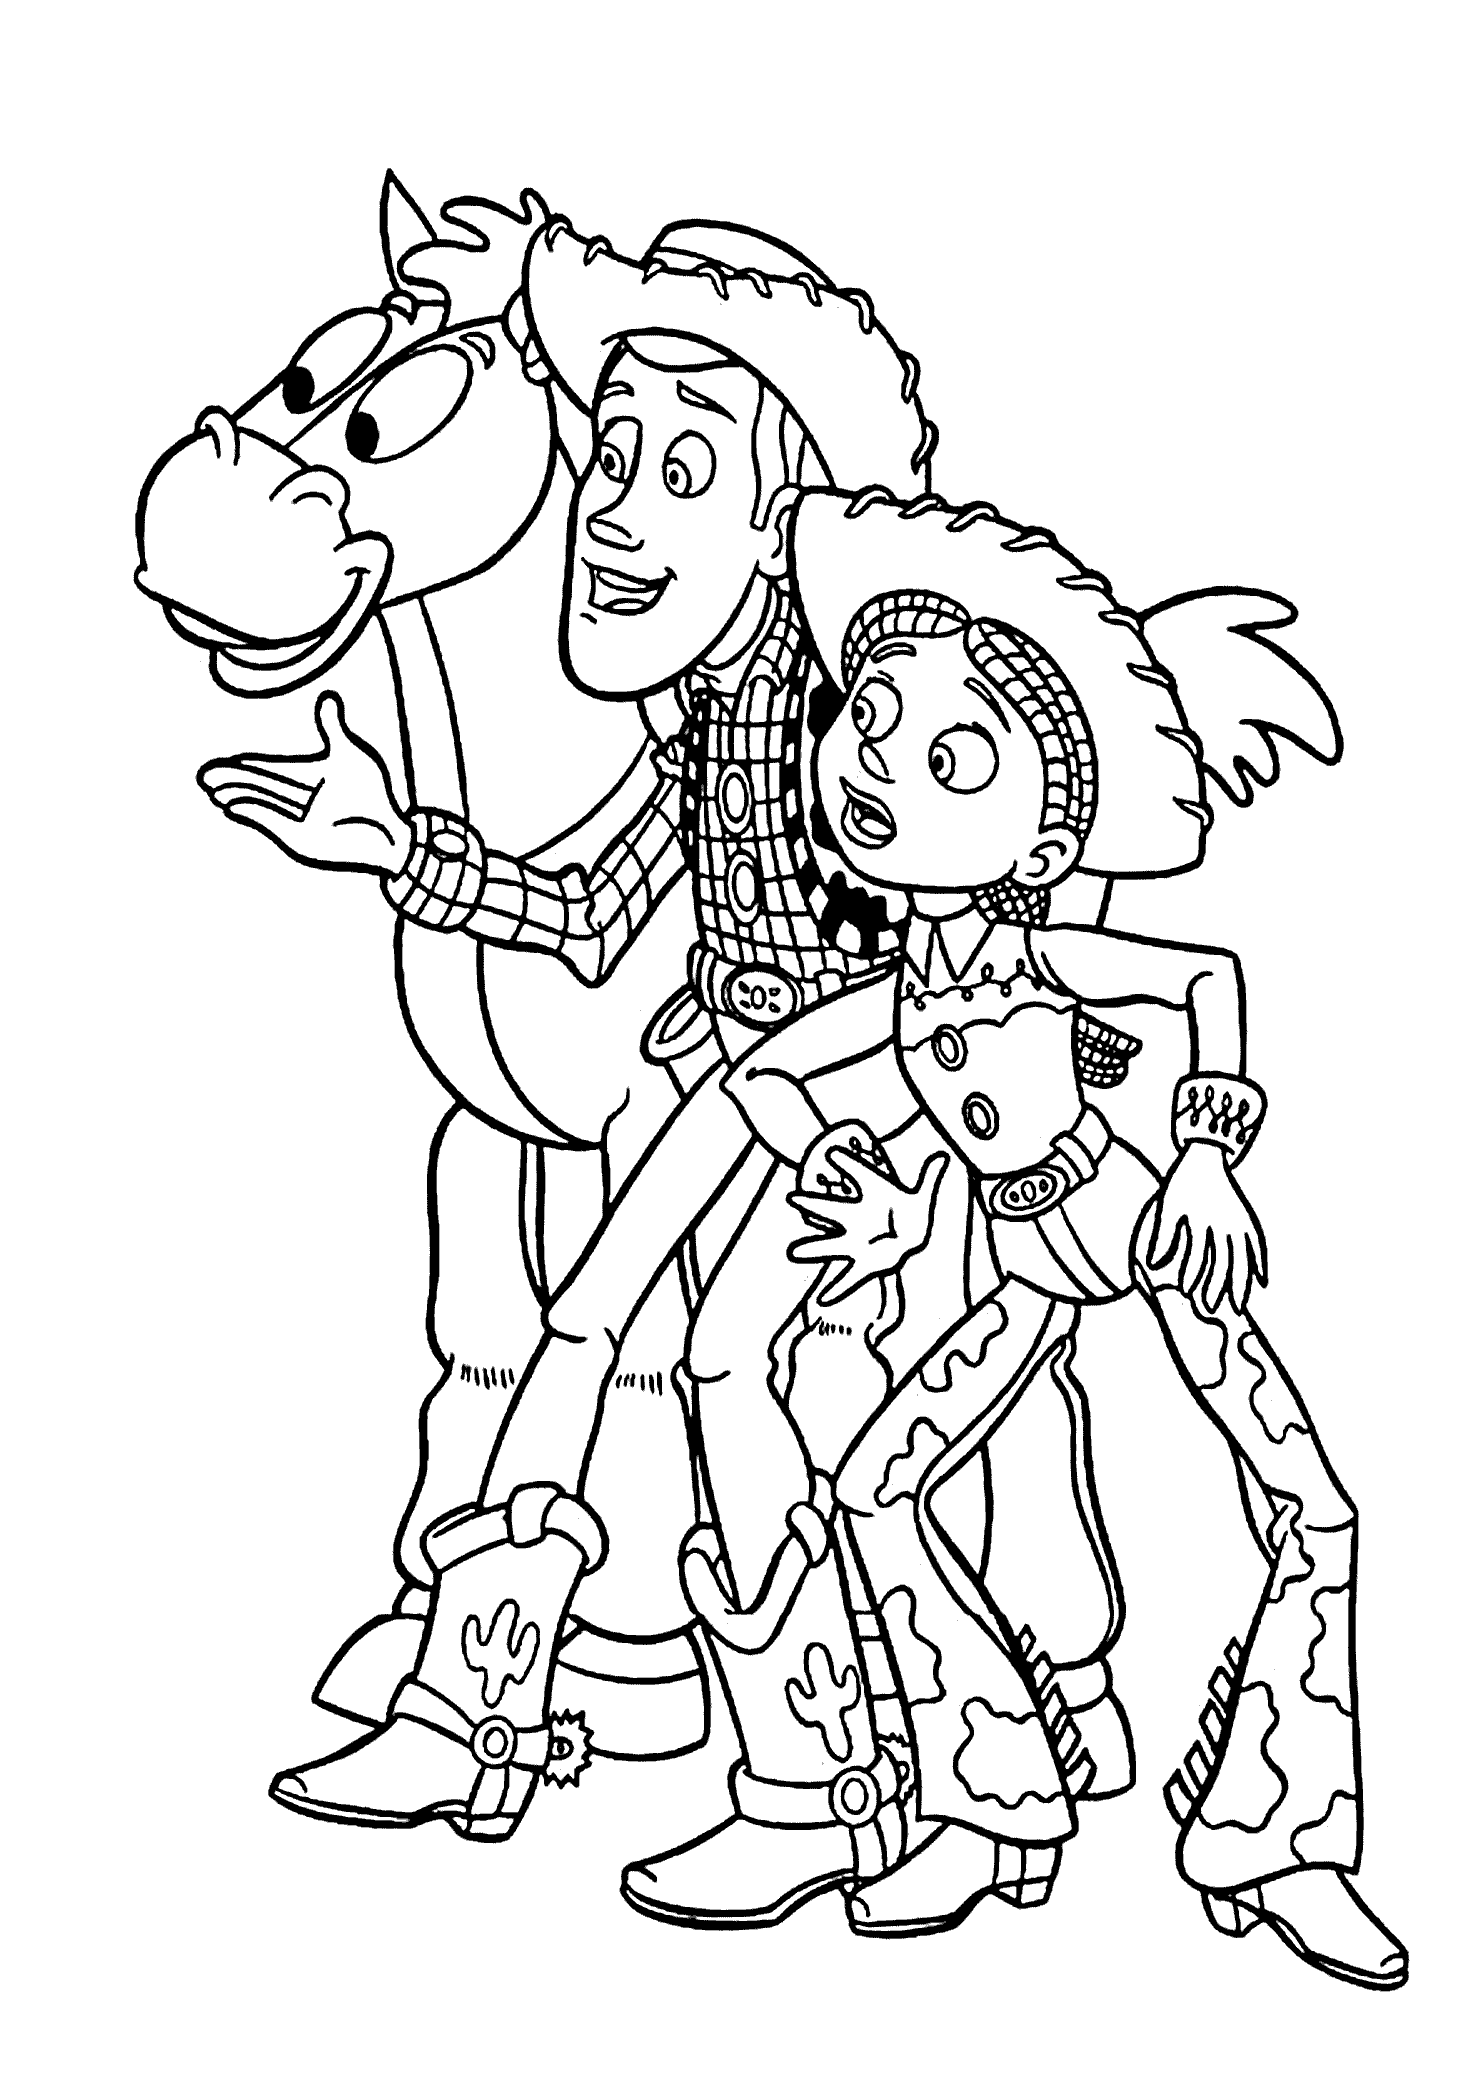 Bullseye Coloring Page Toy Story Coloring Pages Disney Coloring Images And Photos Finder